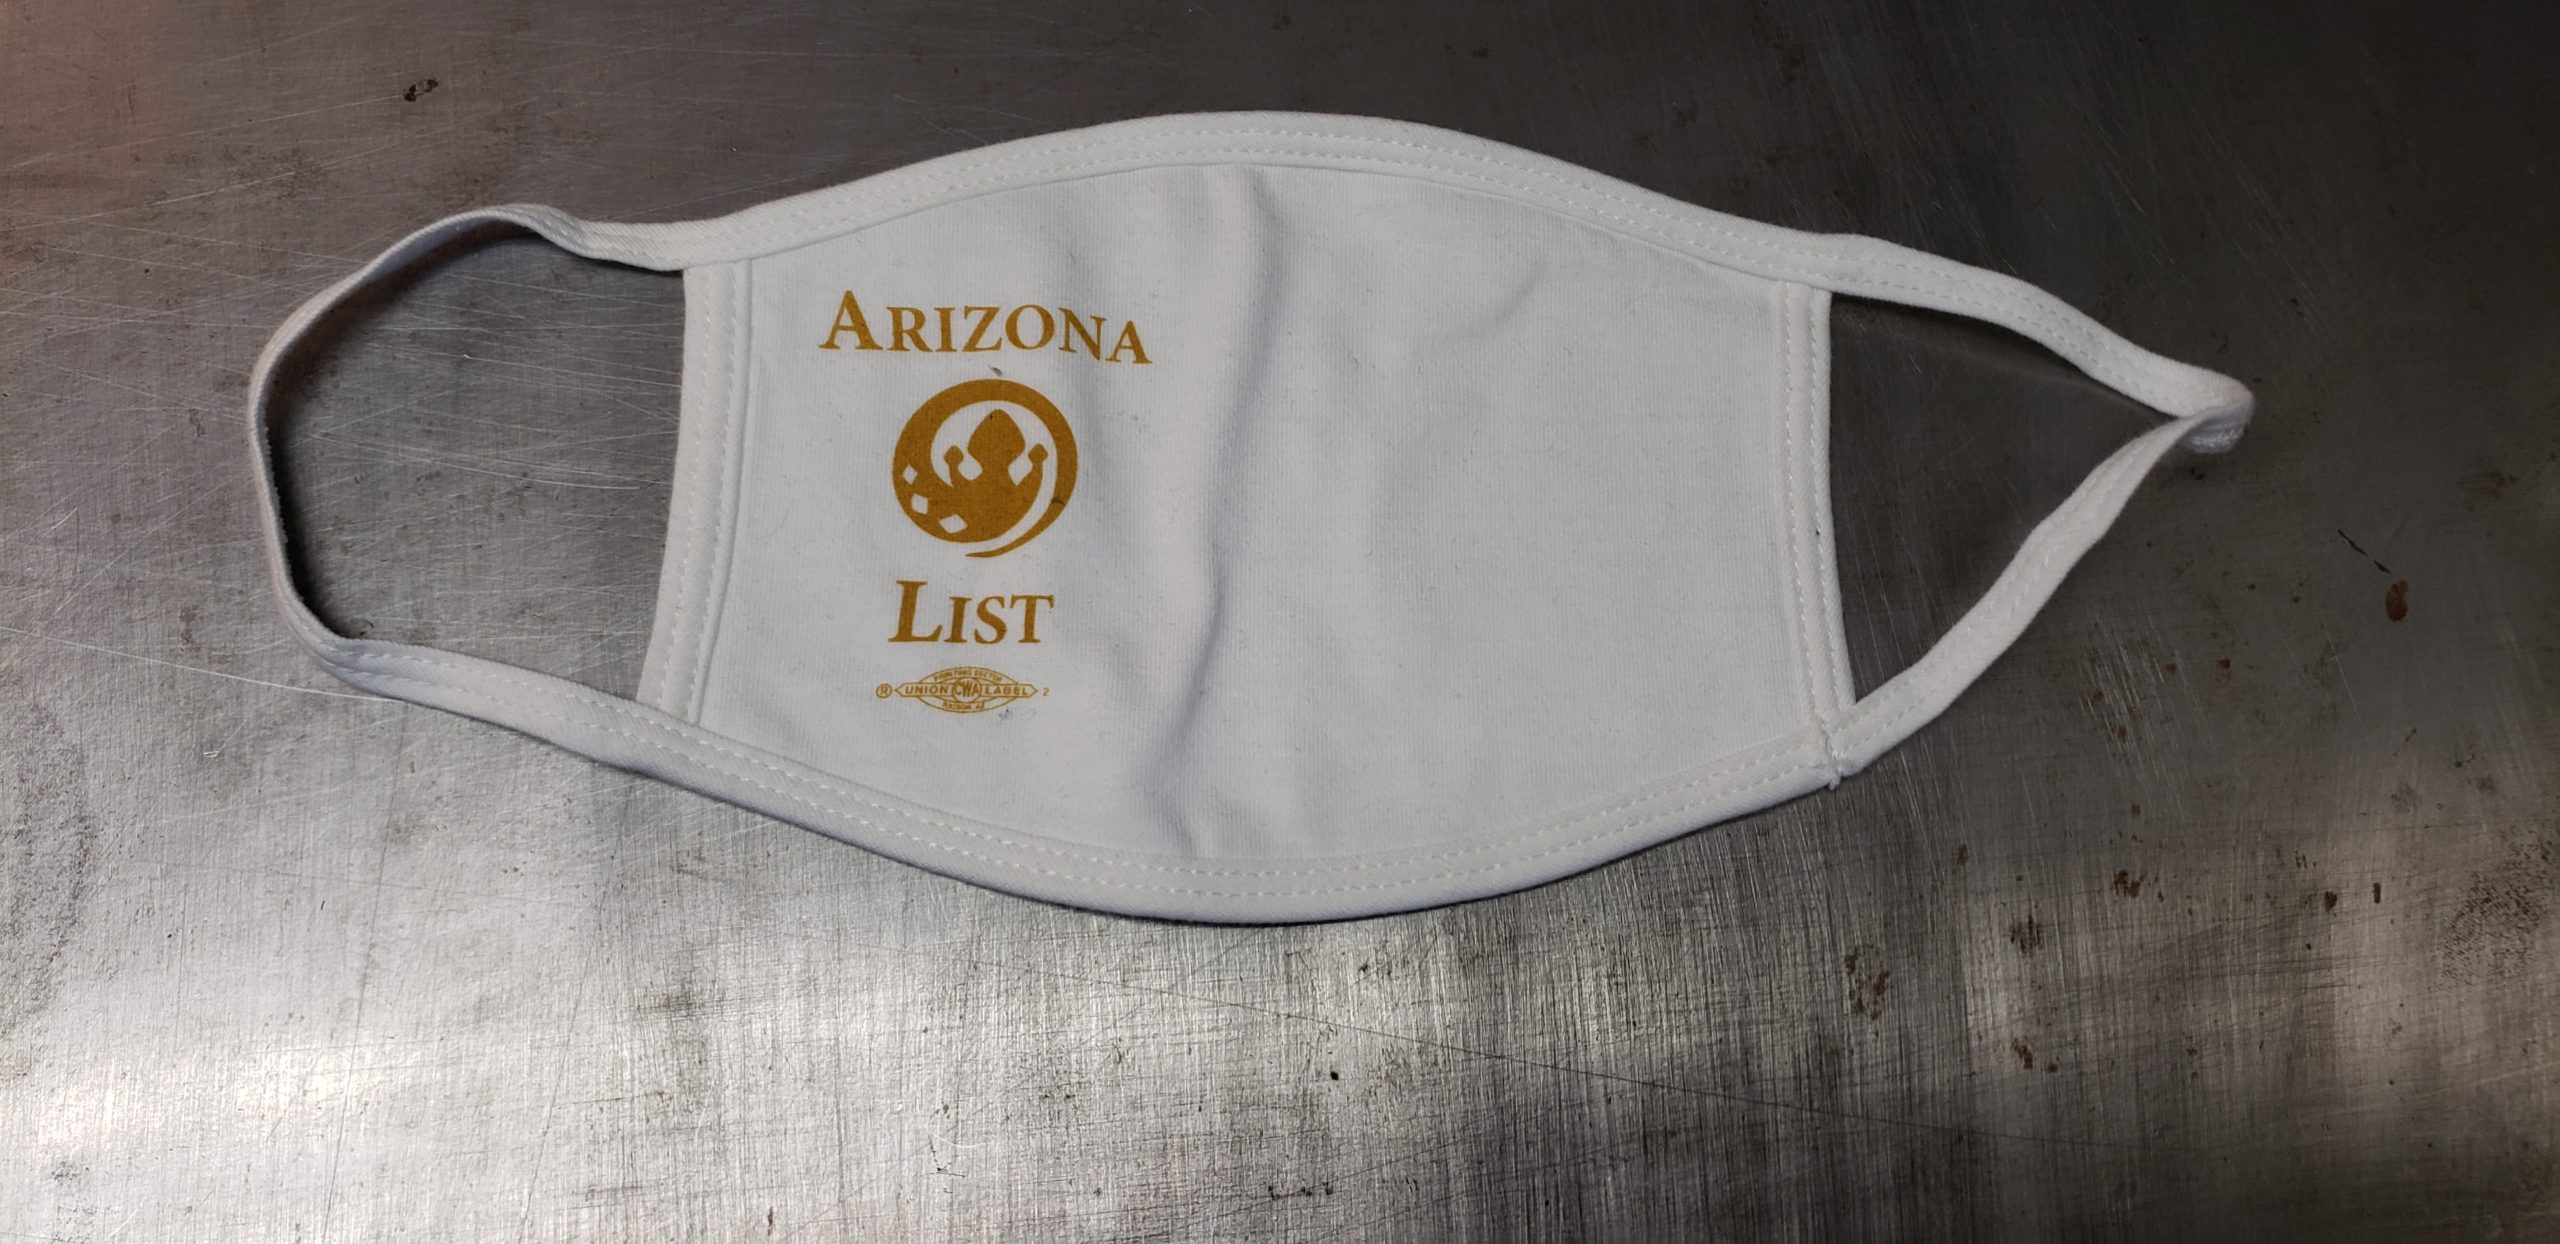 White cotton face mask with union screen printed one color design reading, "ARIZONA LIST" around a circular spiraling logo of a spade/crown design.